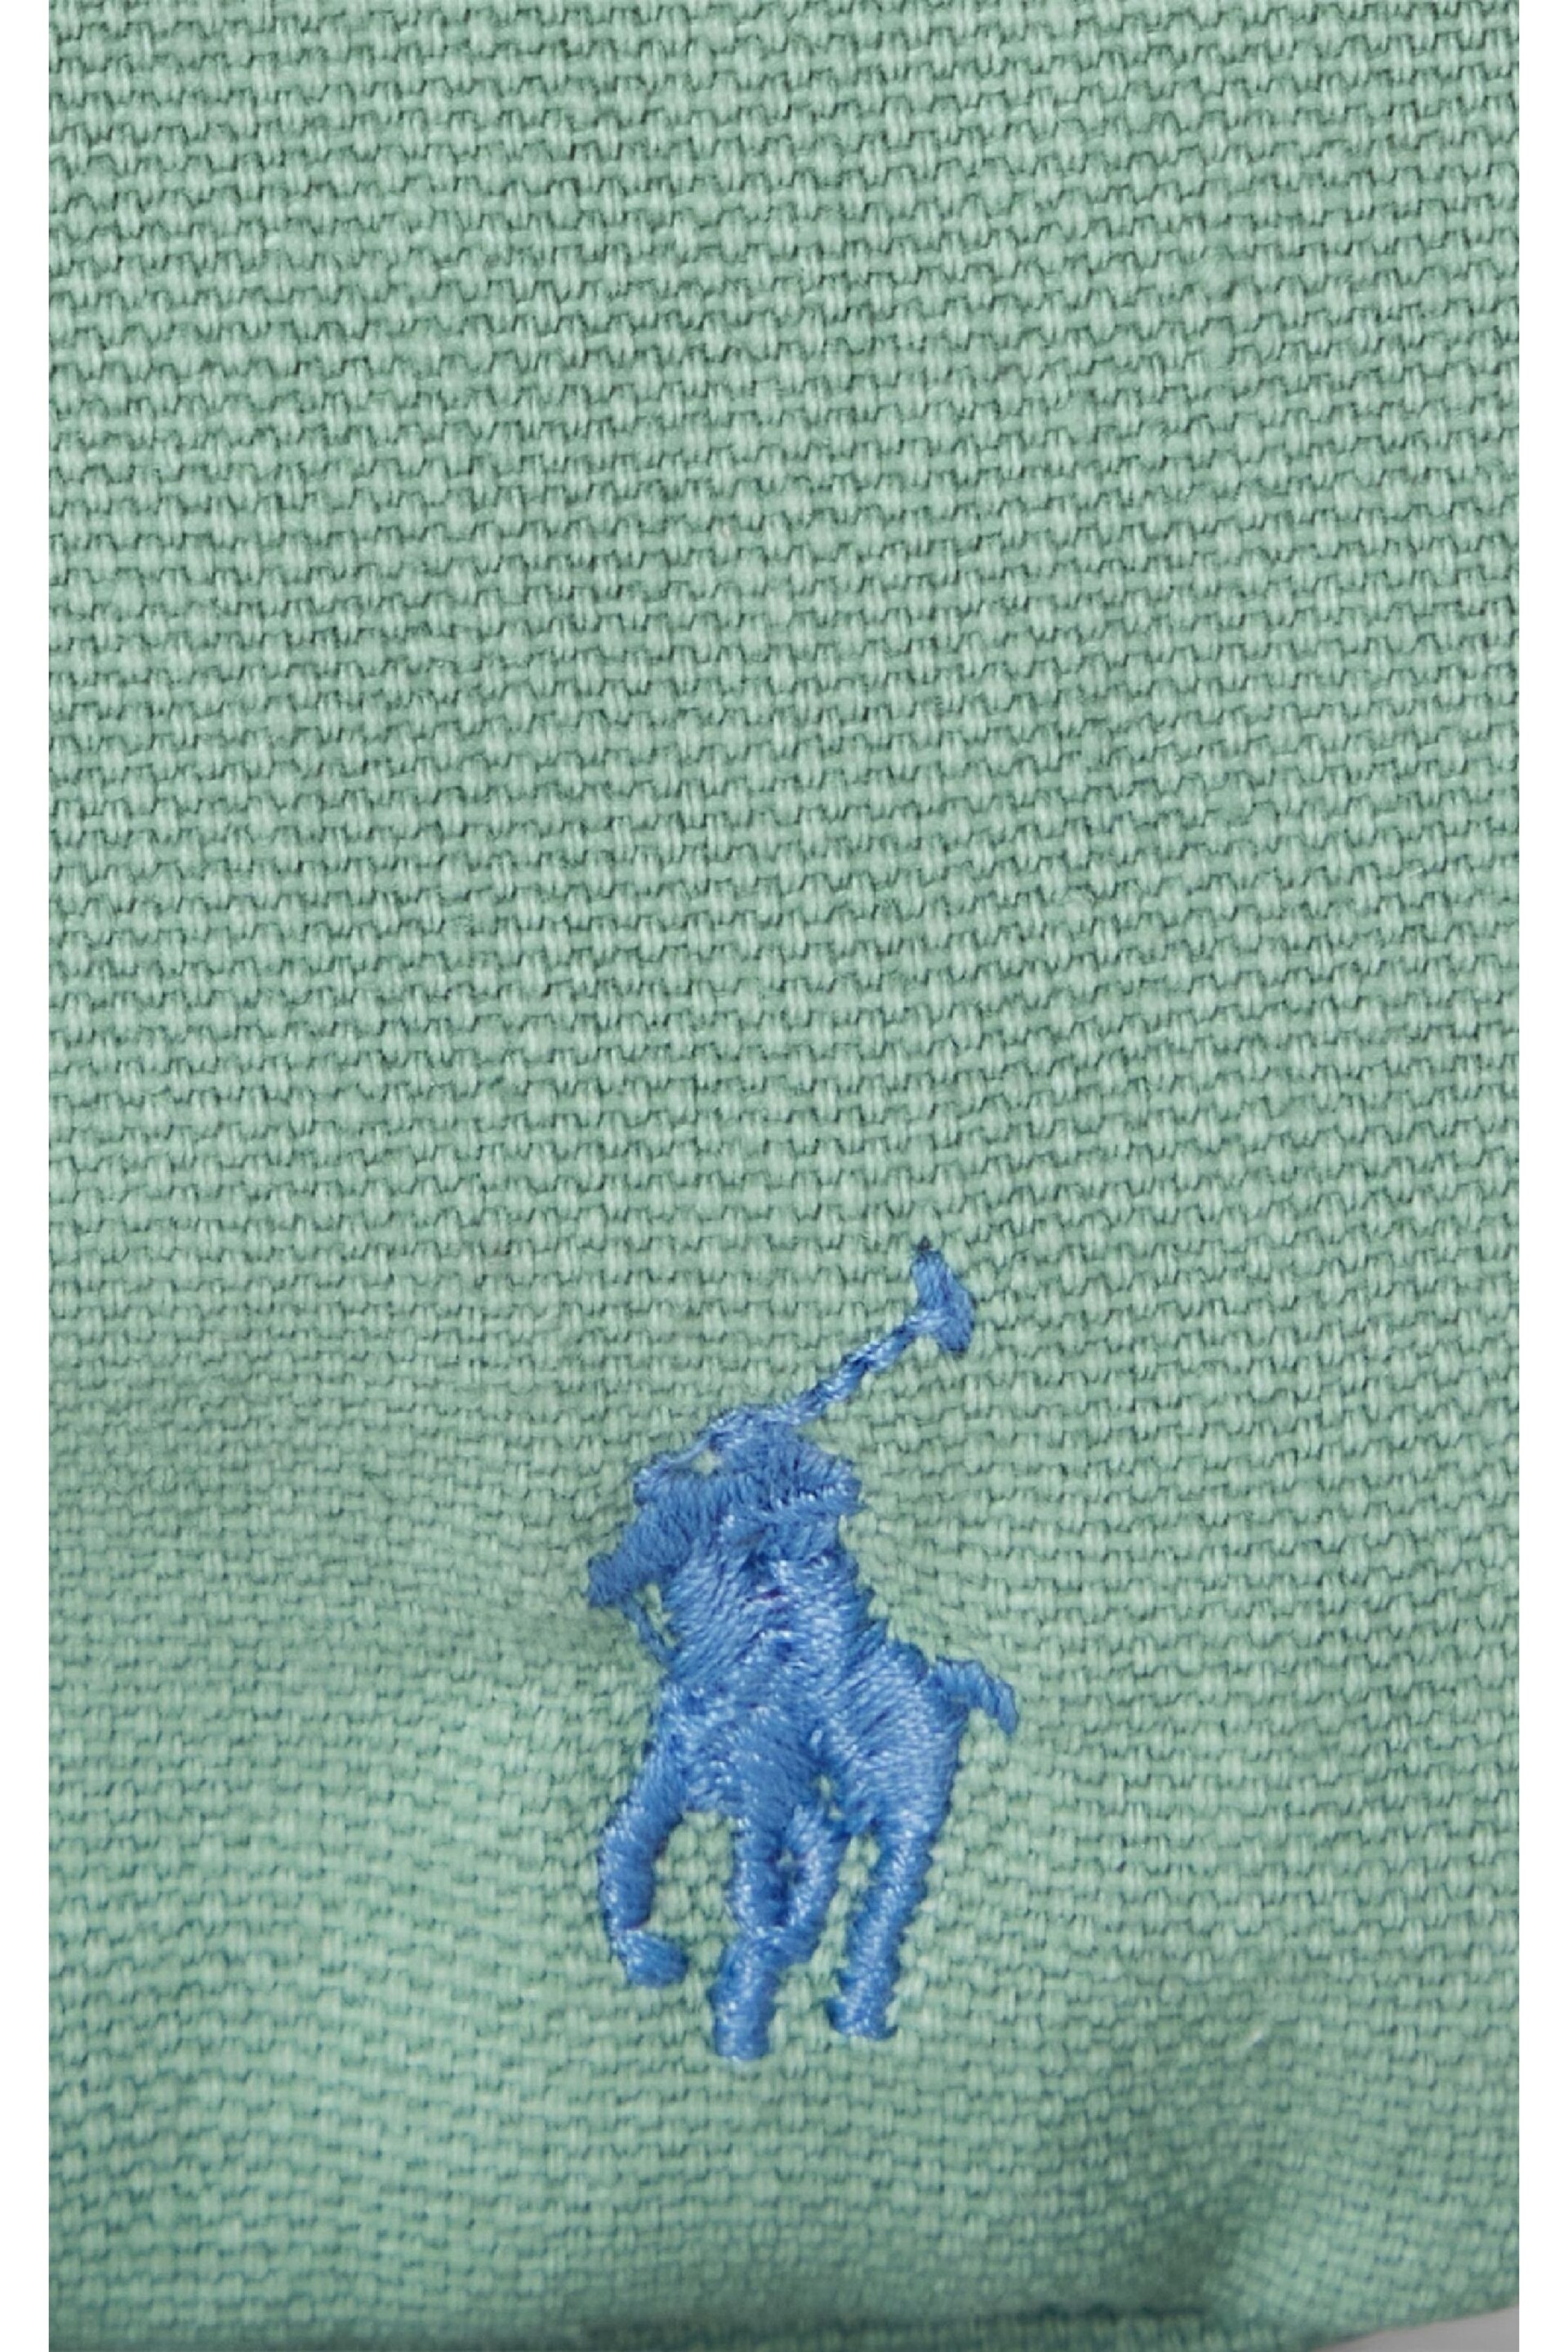 Polo Ralph Lauren Canvas Backpack - Image 7 of 7